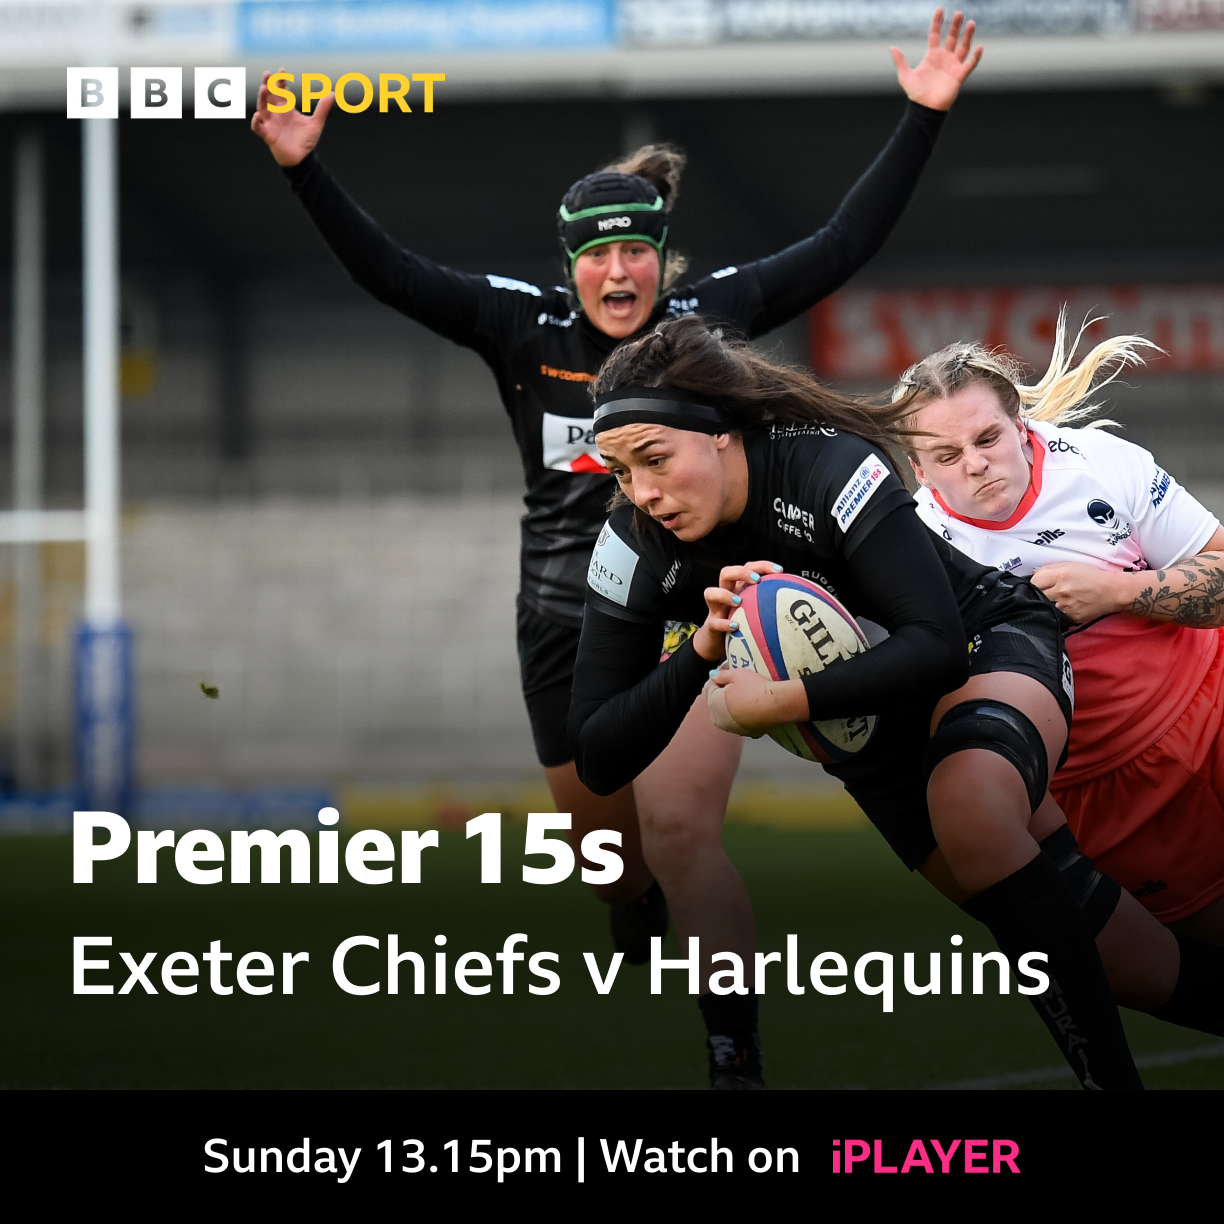 Premier 15s Watch Exeter Chiefs v Harlequins and score - Live